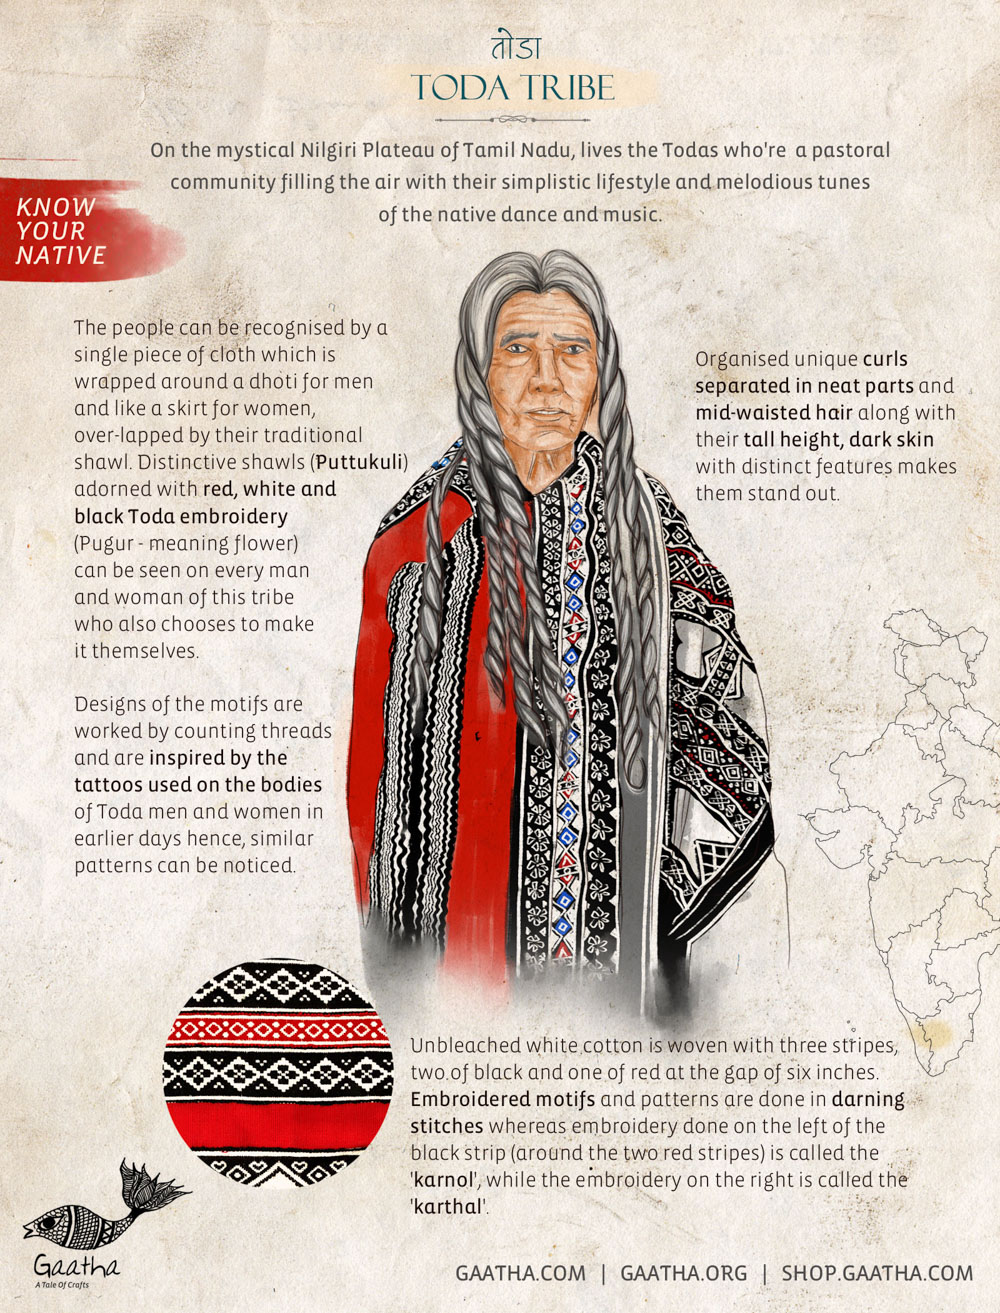 Know Your Native | Unique characteristics of Indian Tribal communities